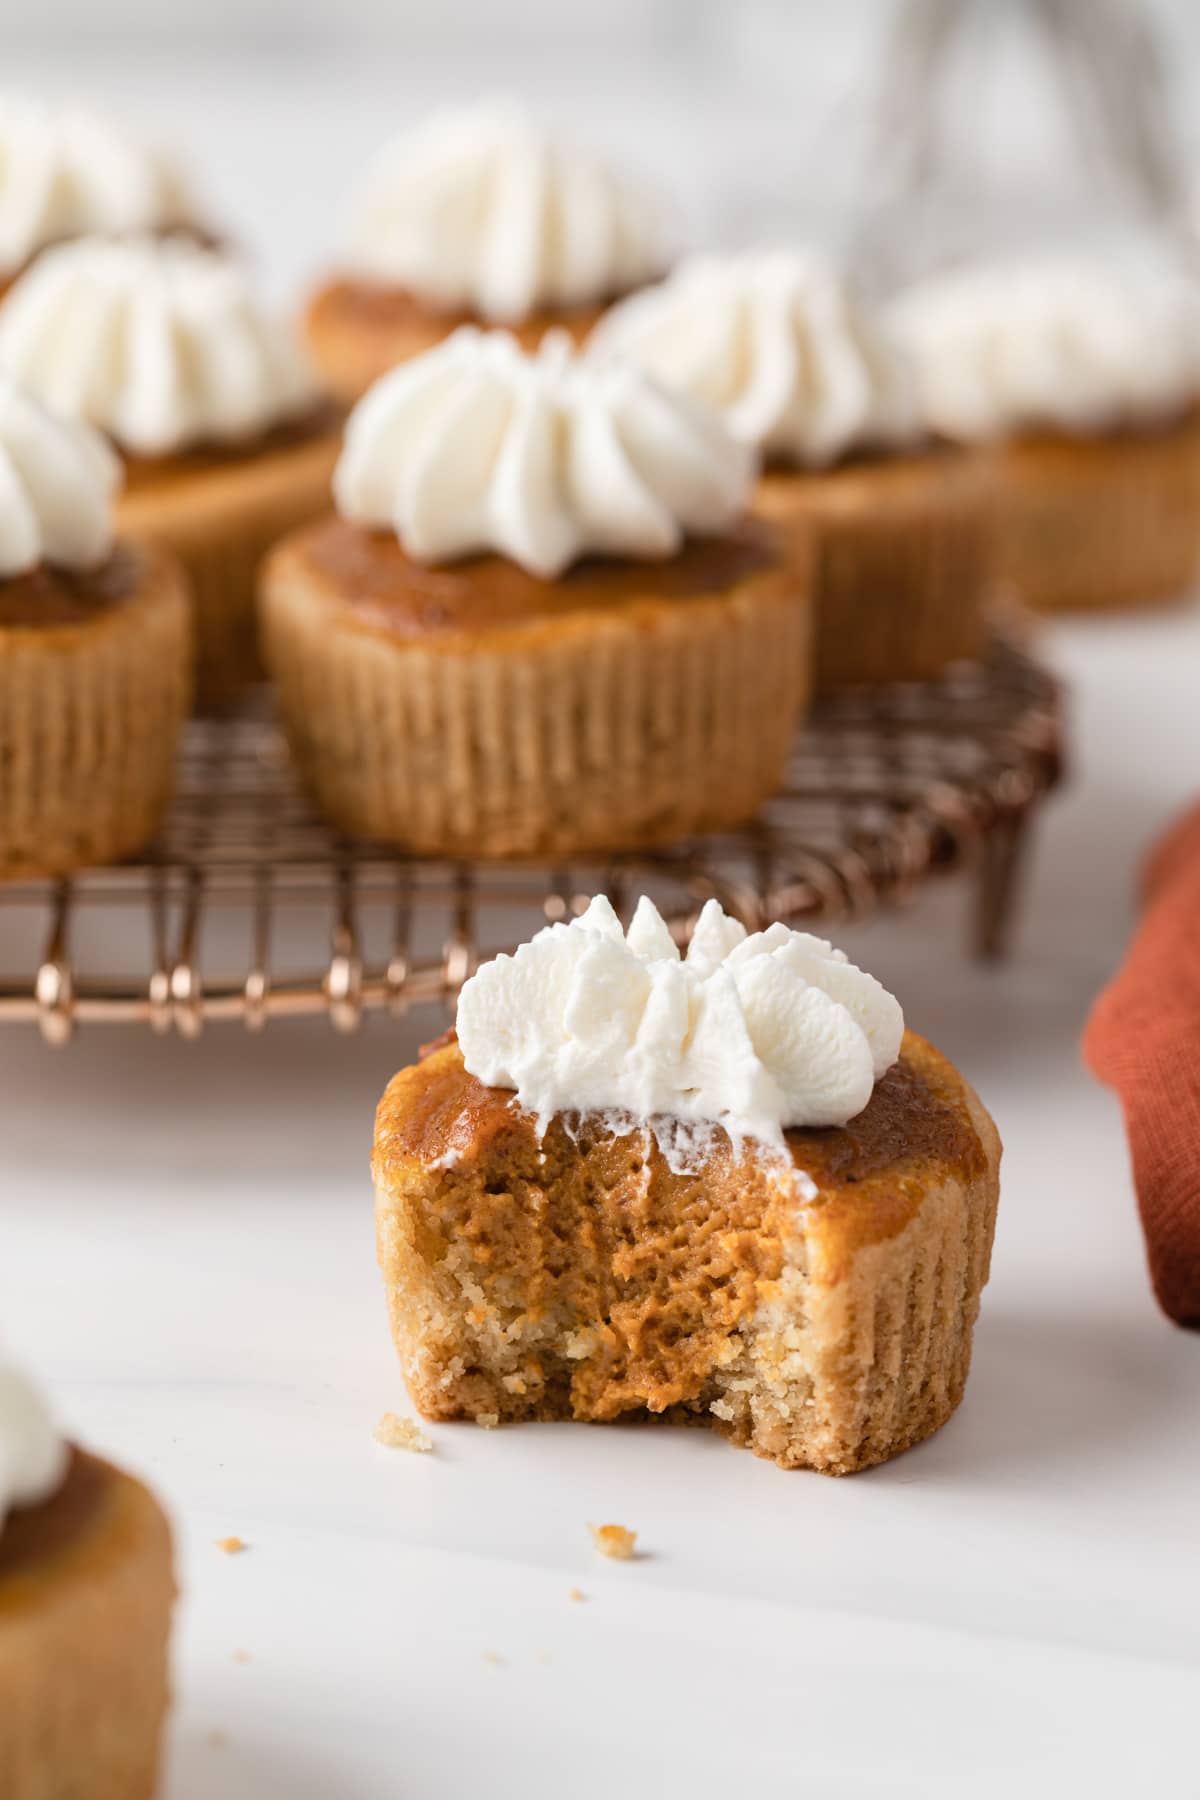 side view of mini pumpkin pie with a bite taken out so the inside is visible